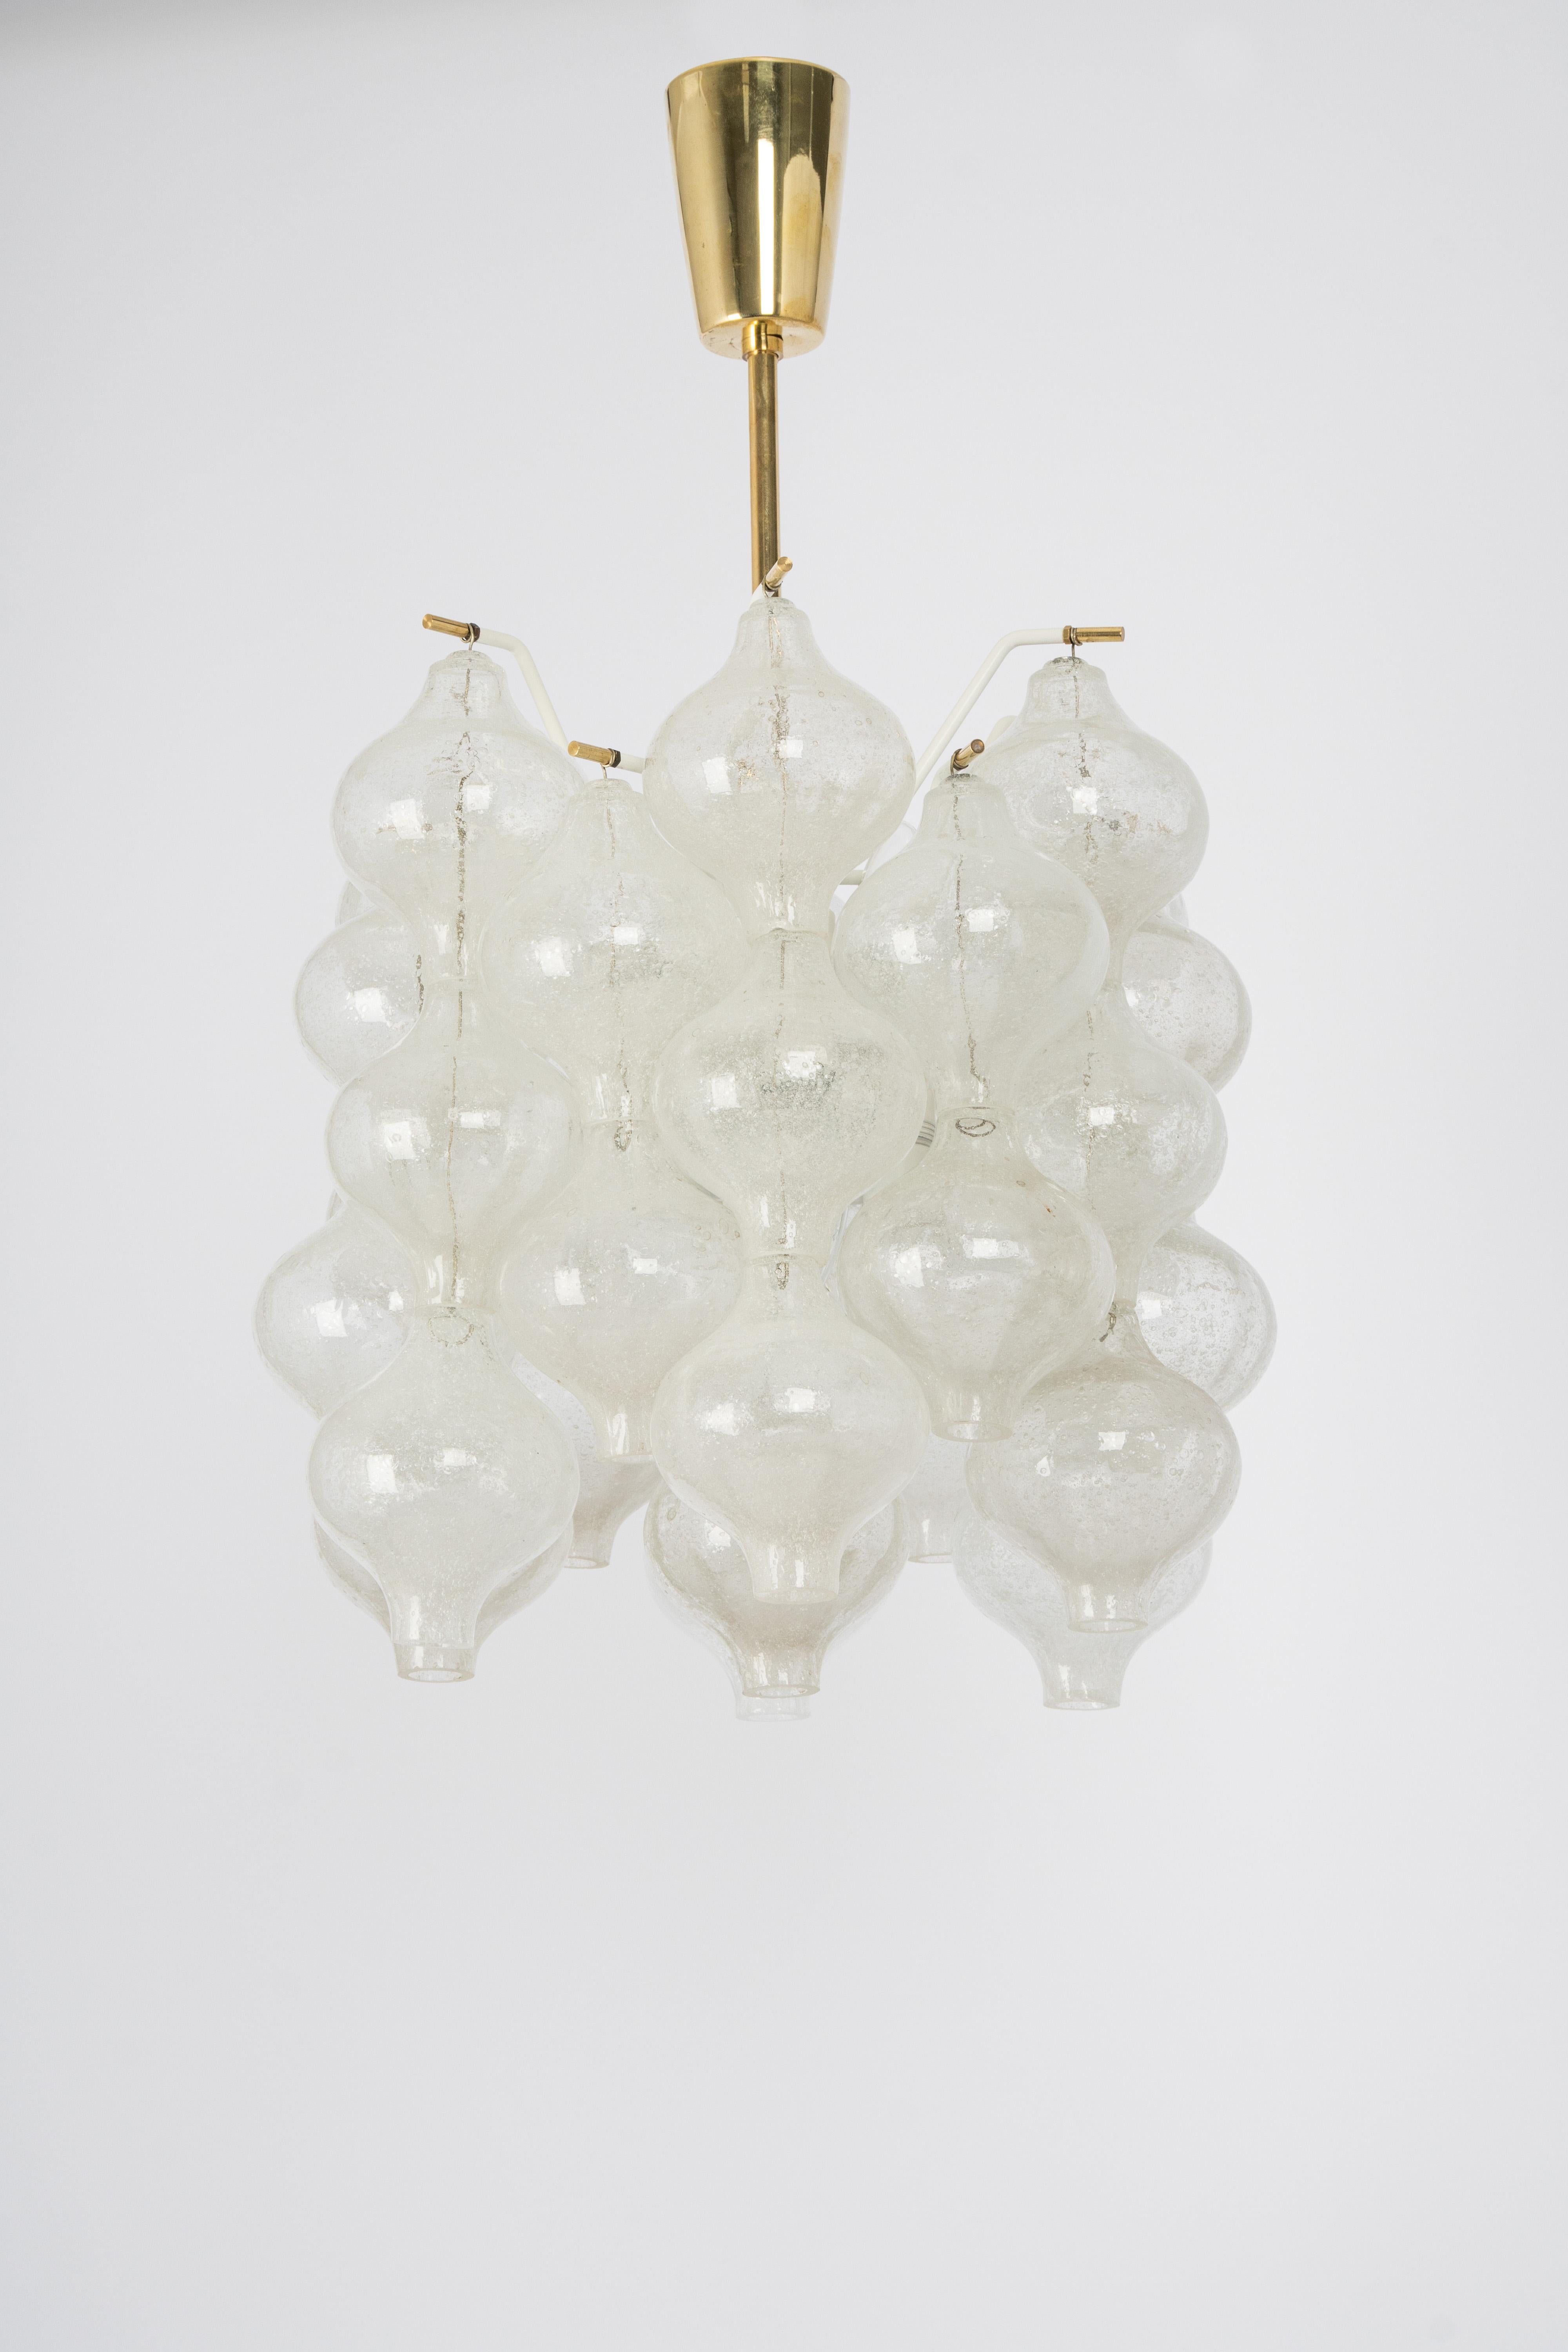 Wonderful onion-shaped -Tulipan glass Pendant light. Several hand-blown glasses are suspended on a white painted metal frame and brass center rod.
Best of design from the 1960s by Kalmar, Austria. High quality of the materials.

Measures: